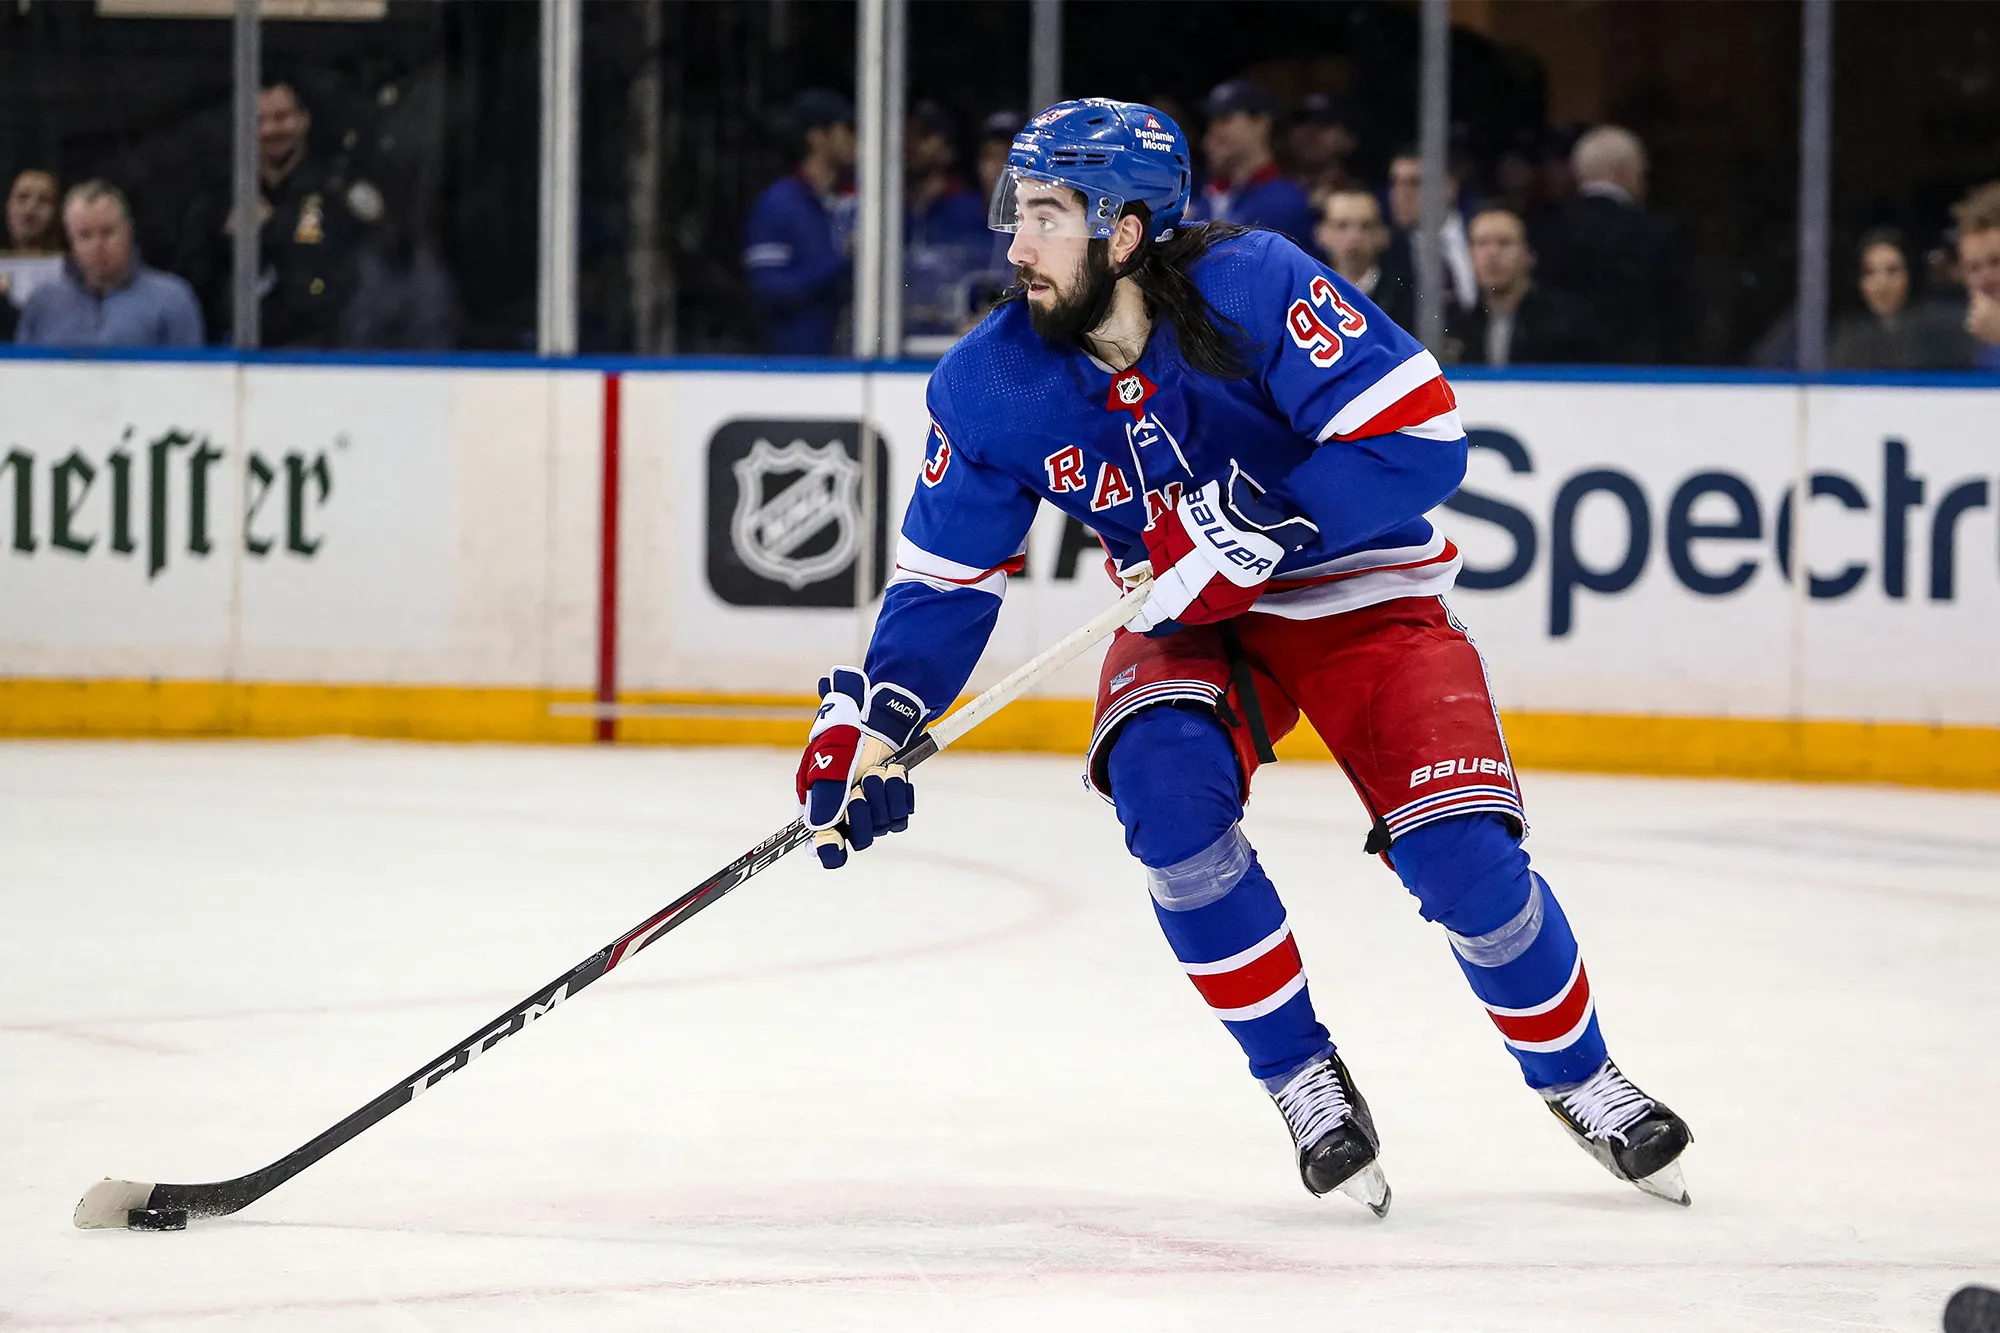 ANNOUNCEMENT: New York Rangers announced that Mika Zibanejad is Leaving immediately after Facing….